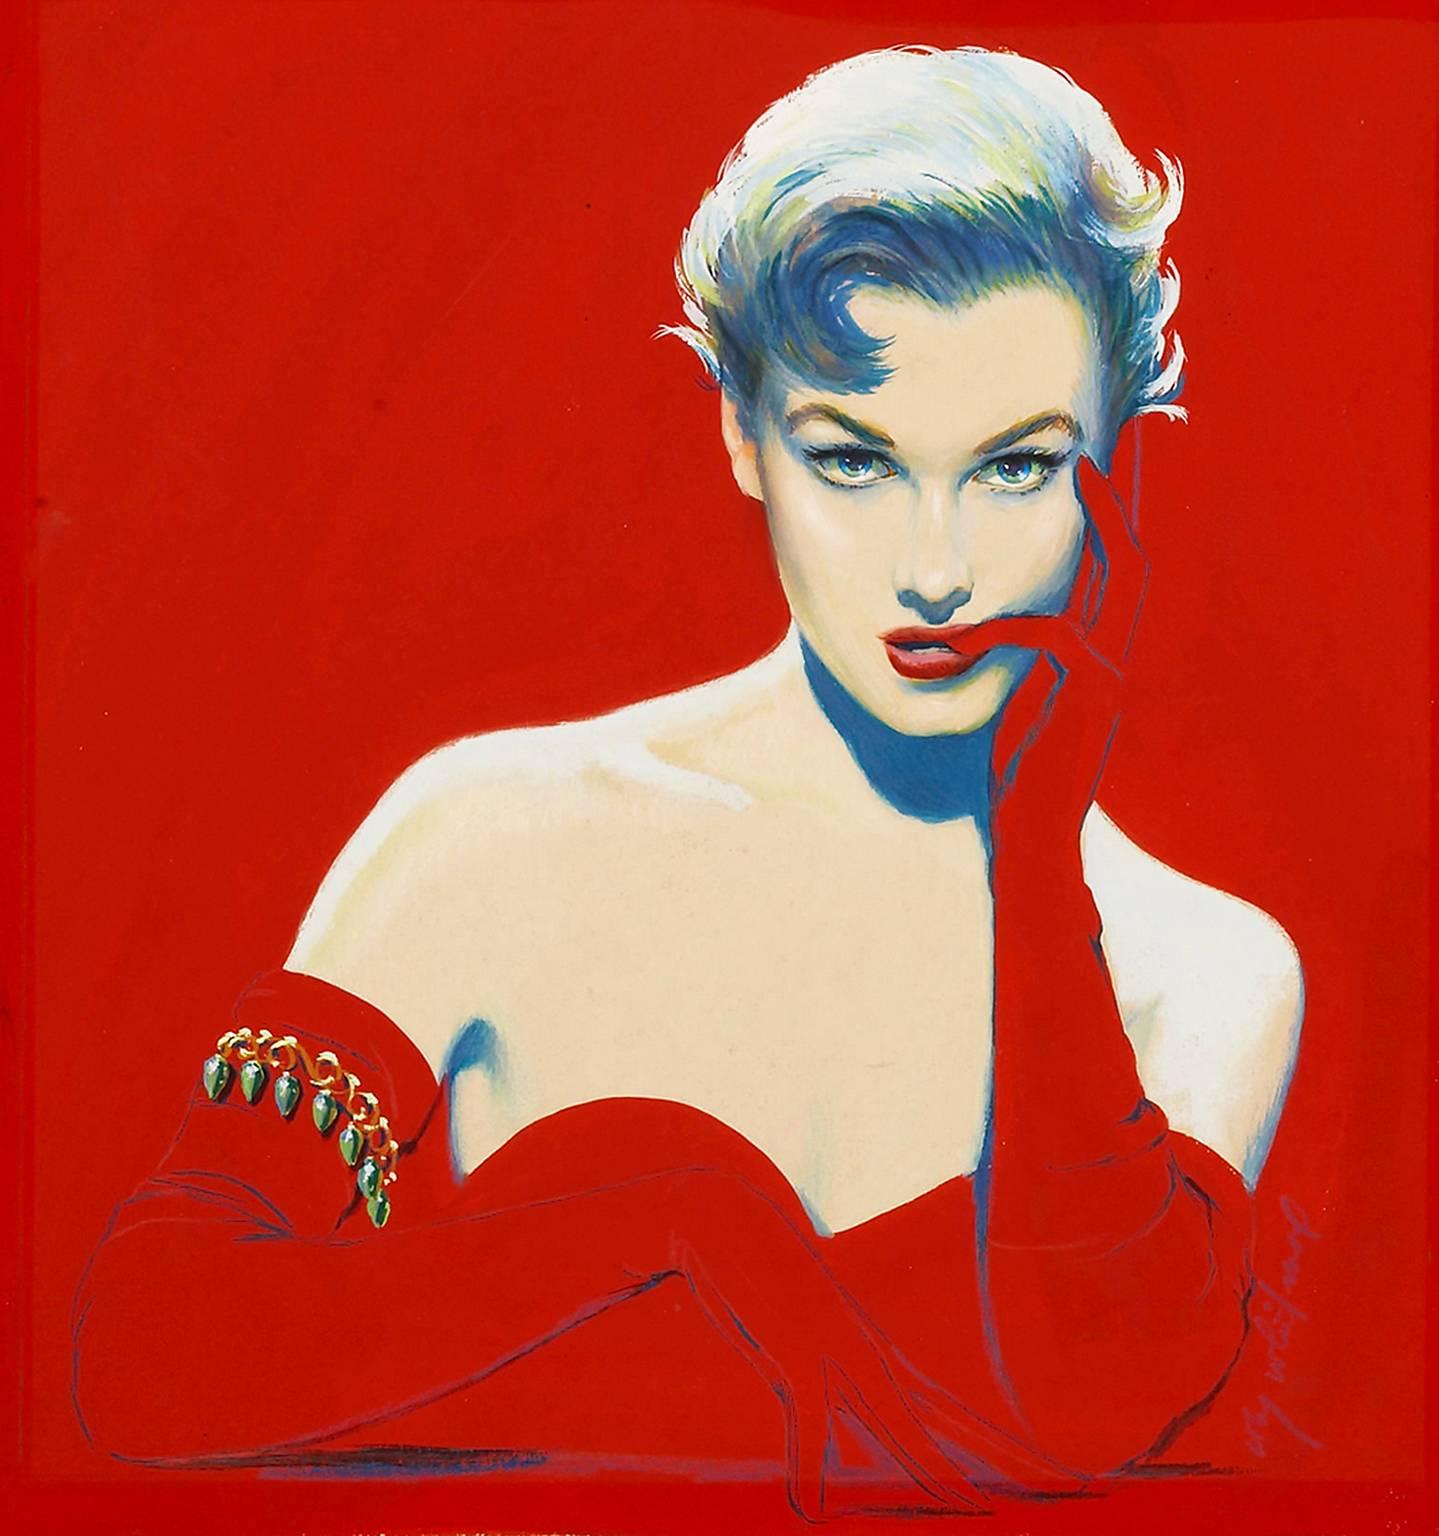 Coby Whitmore Figurative Painting - Seductive Femme Fatale Kim Novak Look-a-like Illustration in Red  